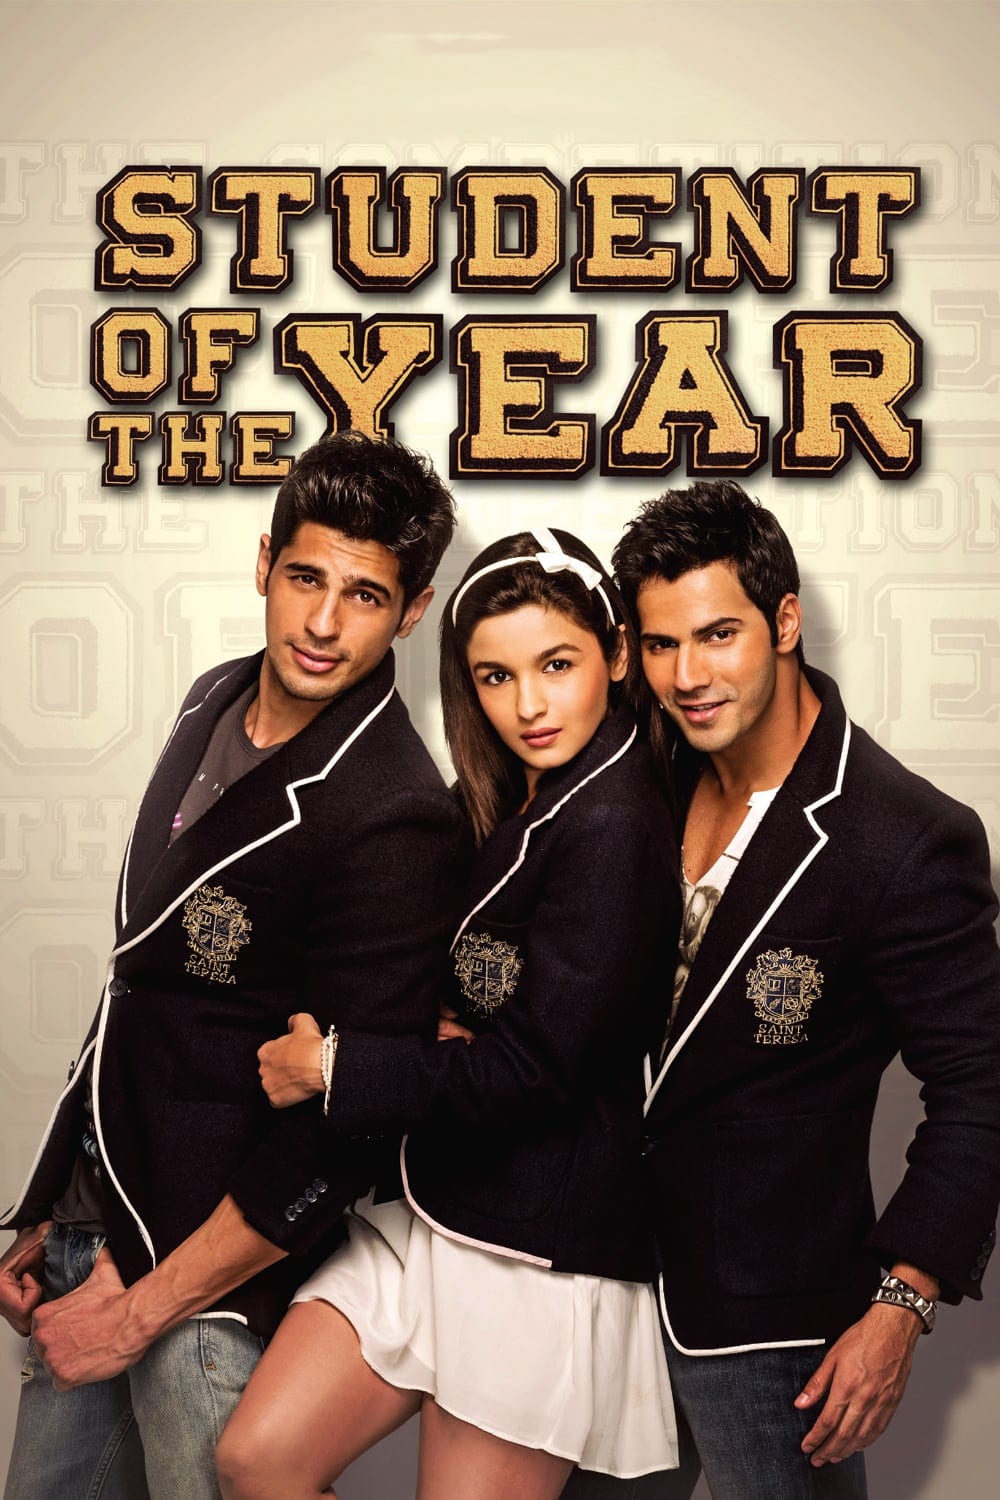 Poster for the movie "Student of the Year"